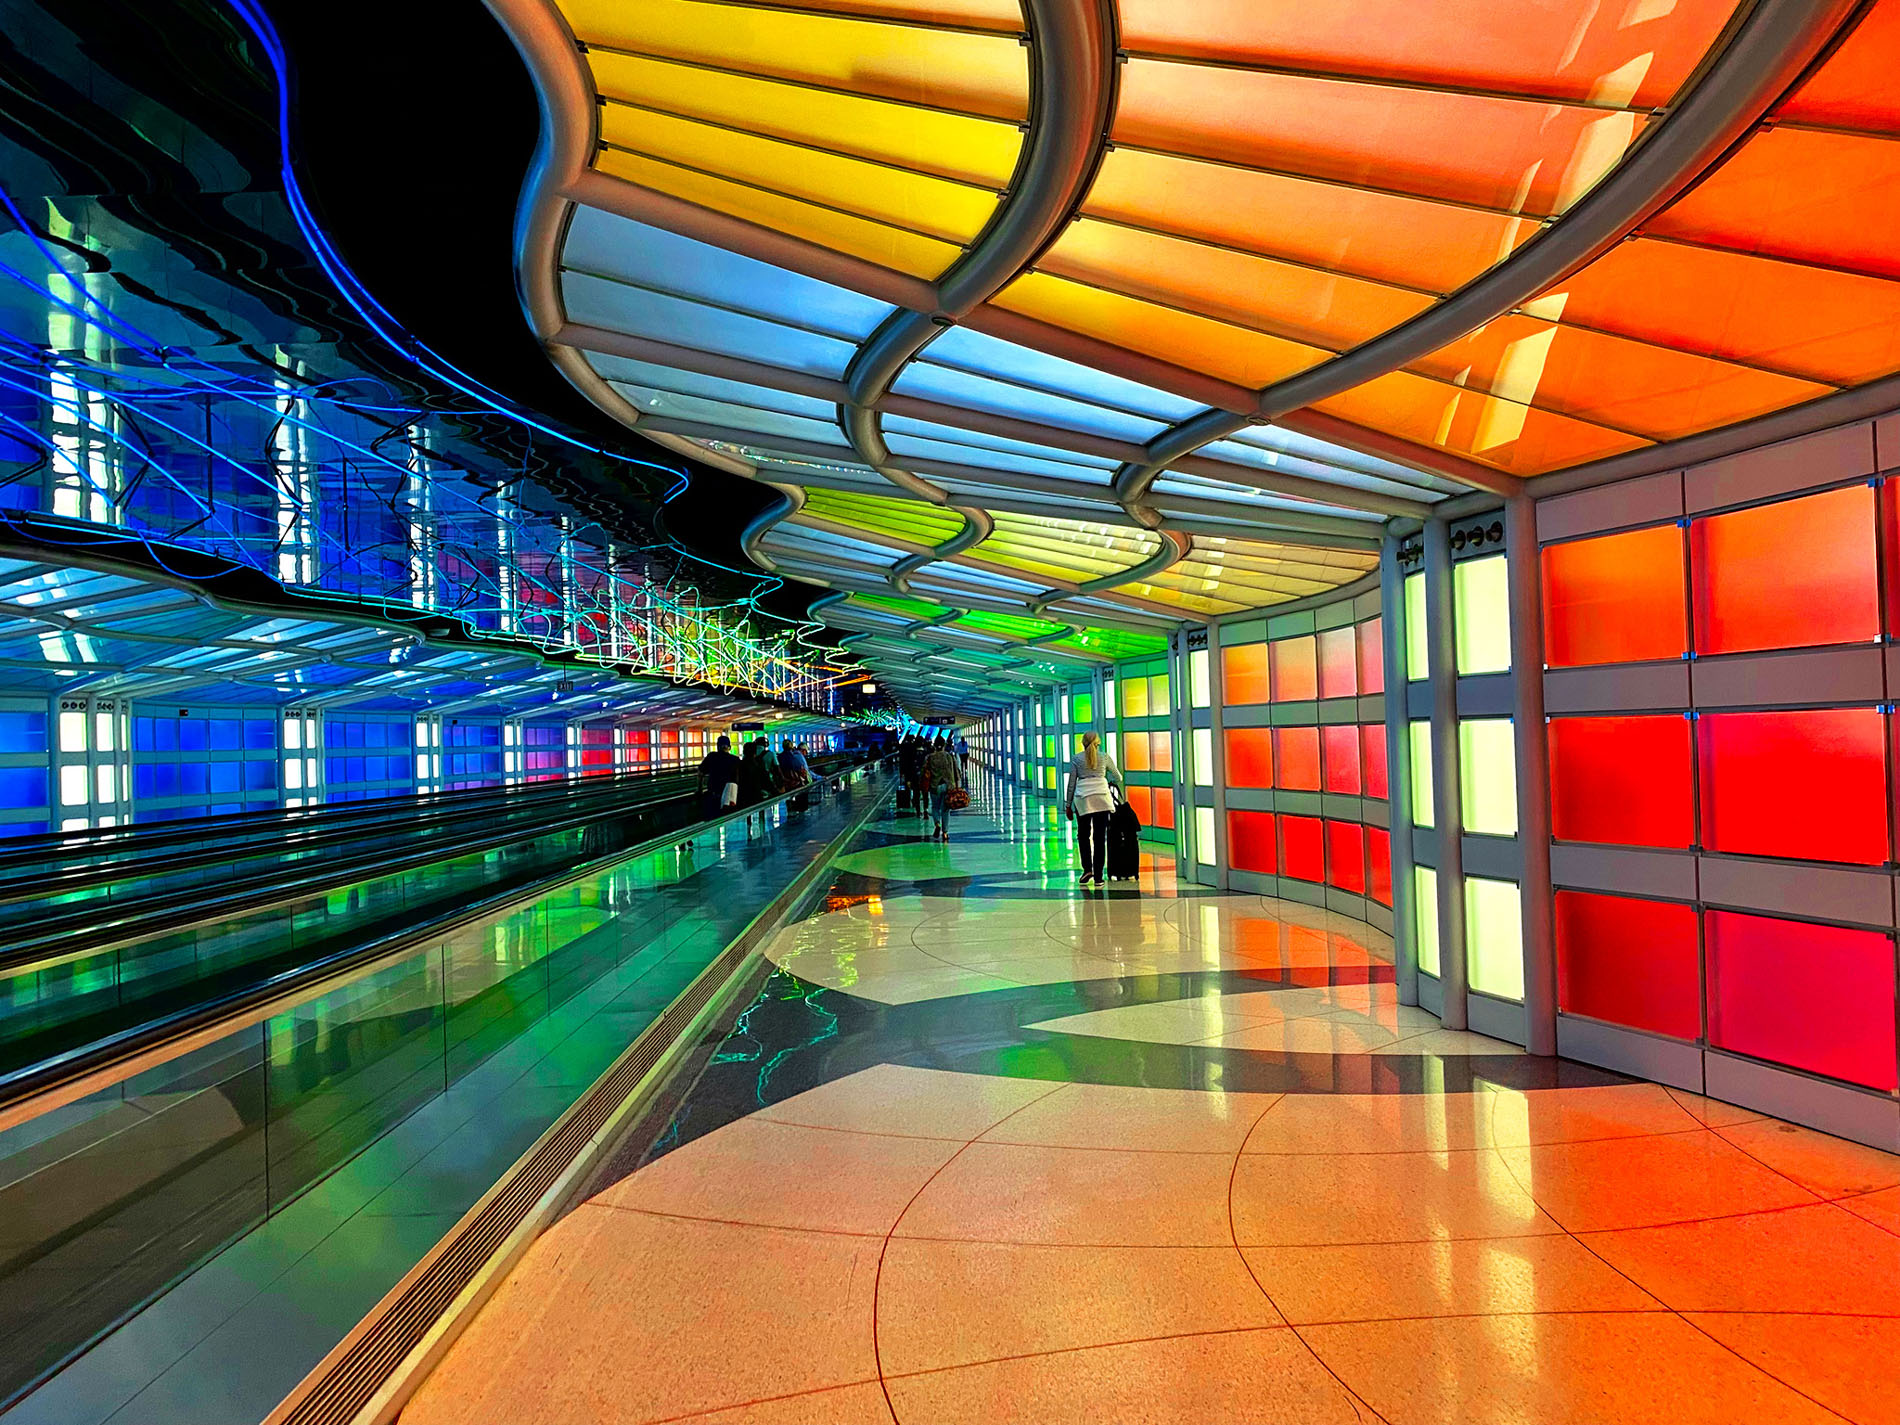 Indoor walkway with moving sidewalk on left. Surrounded by a vibrant rainbow colored panels in walls and ceiling